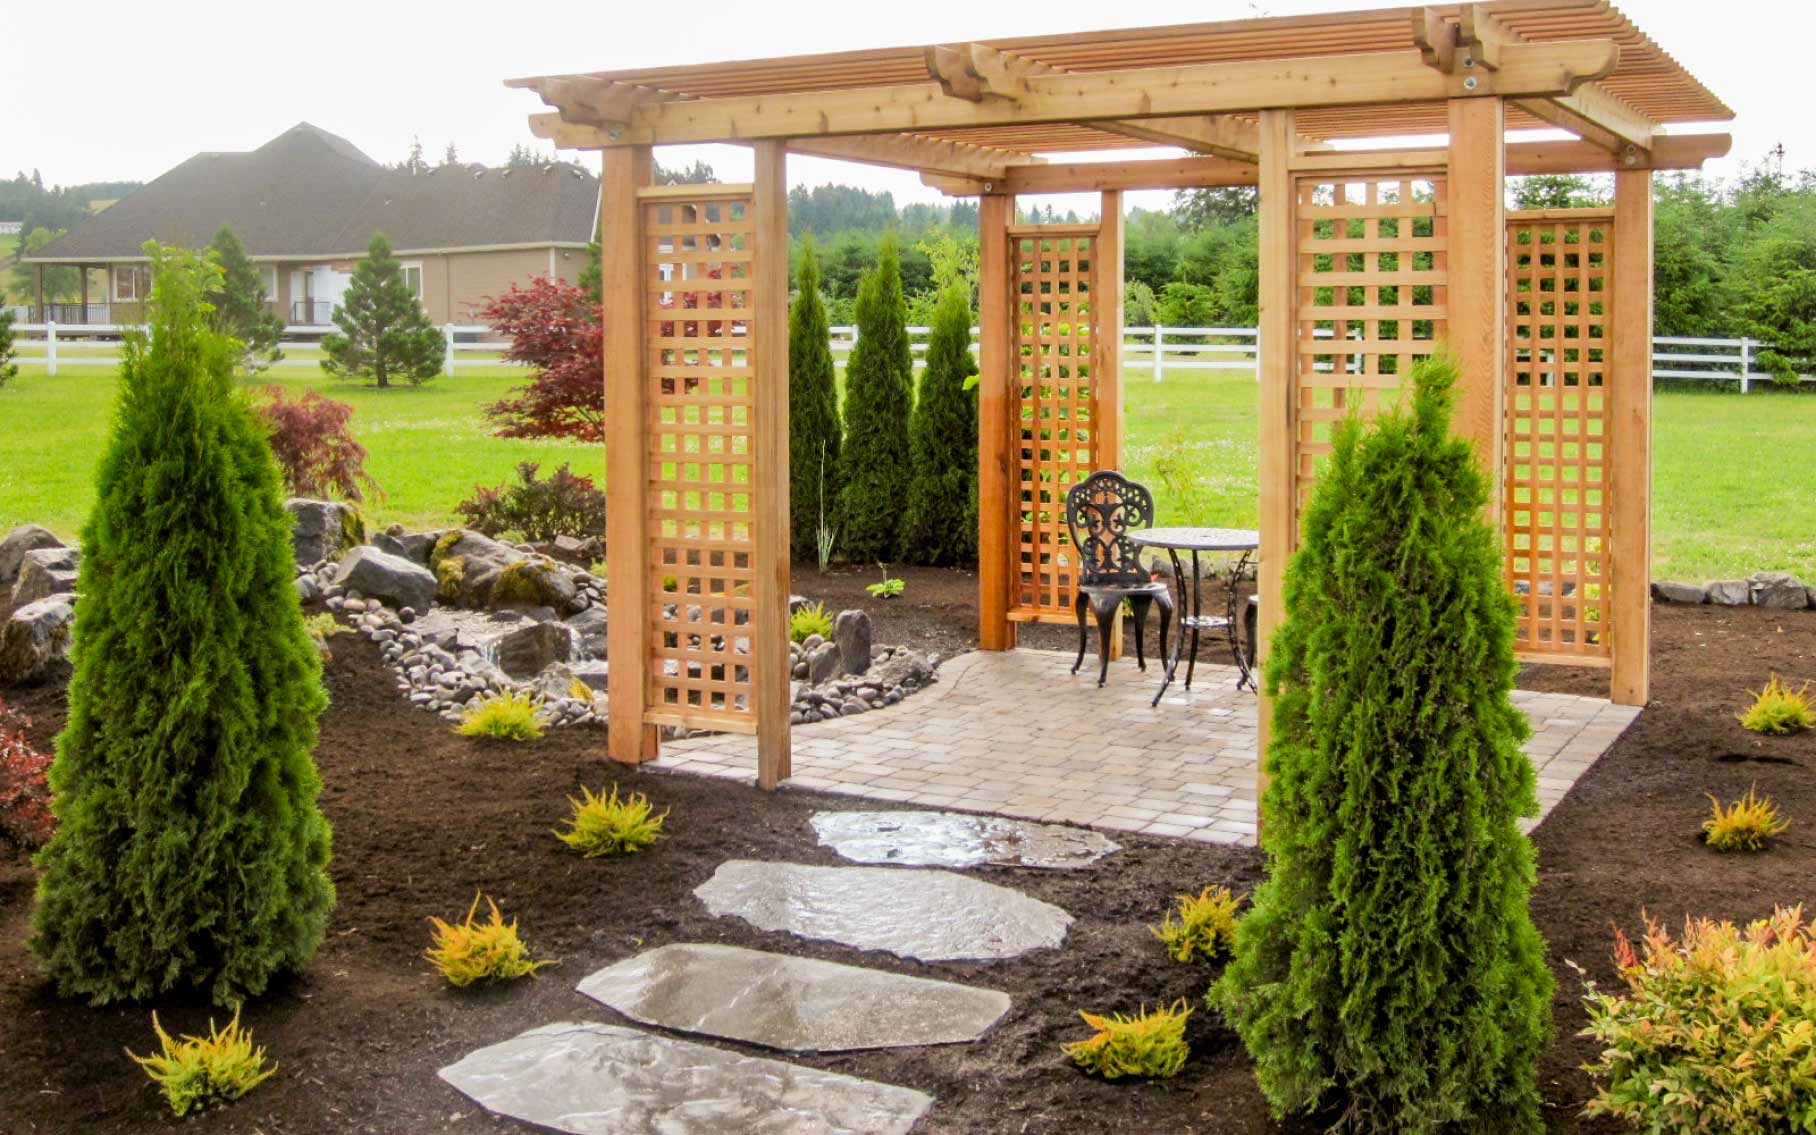 Paver patio estimates, Outdor Living Construction Hardscapes - Woody's Custom Landscaping